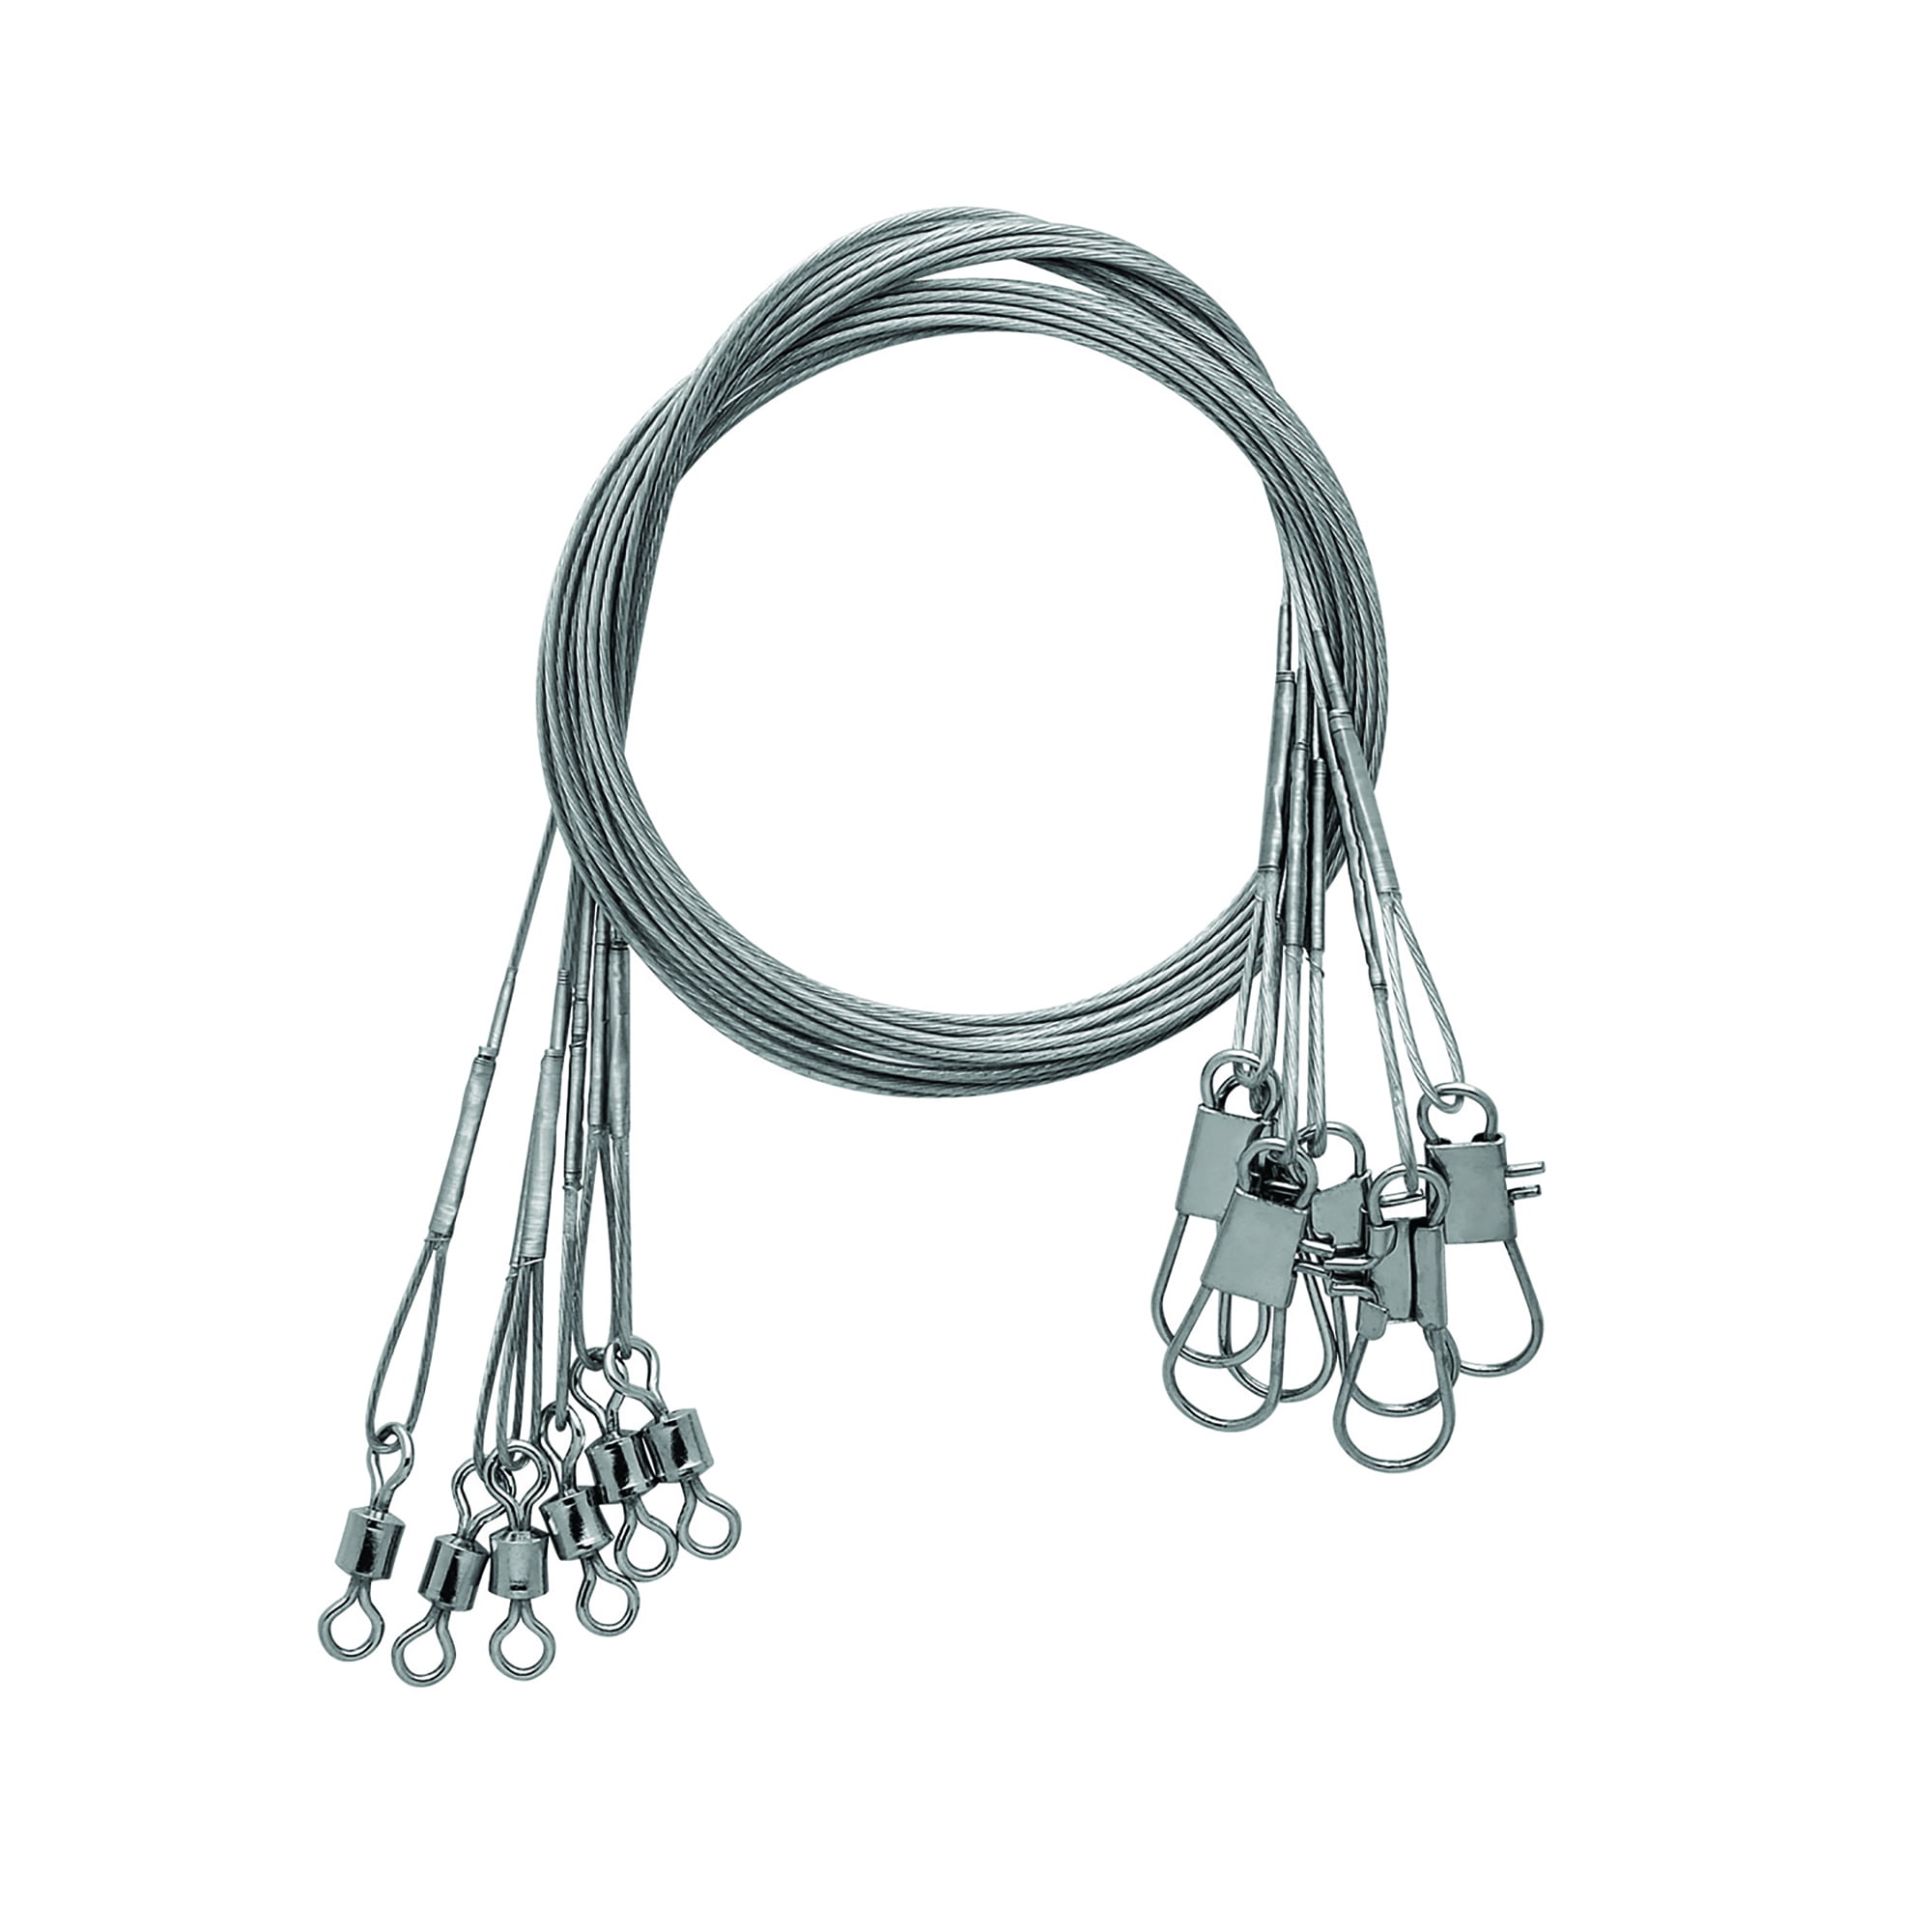 Eagle Claw 12 30 lb. Heavy Duty Wire Leader, Bright, 6 Pack